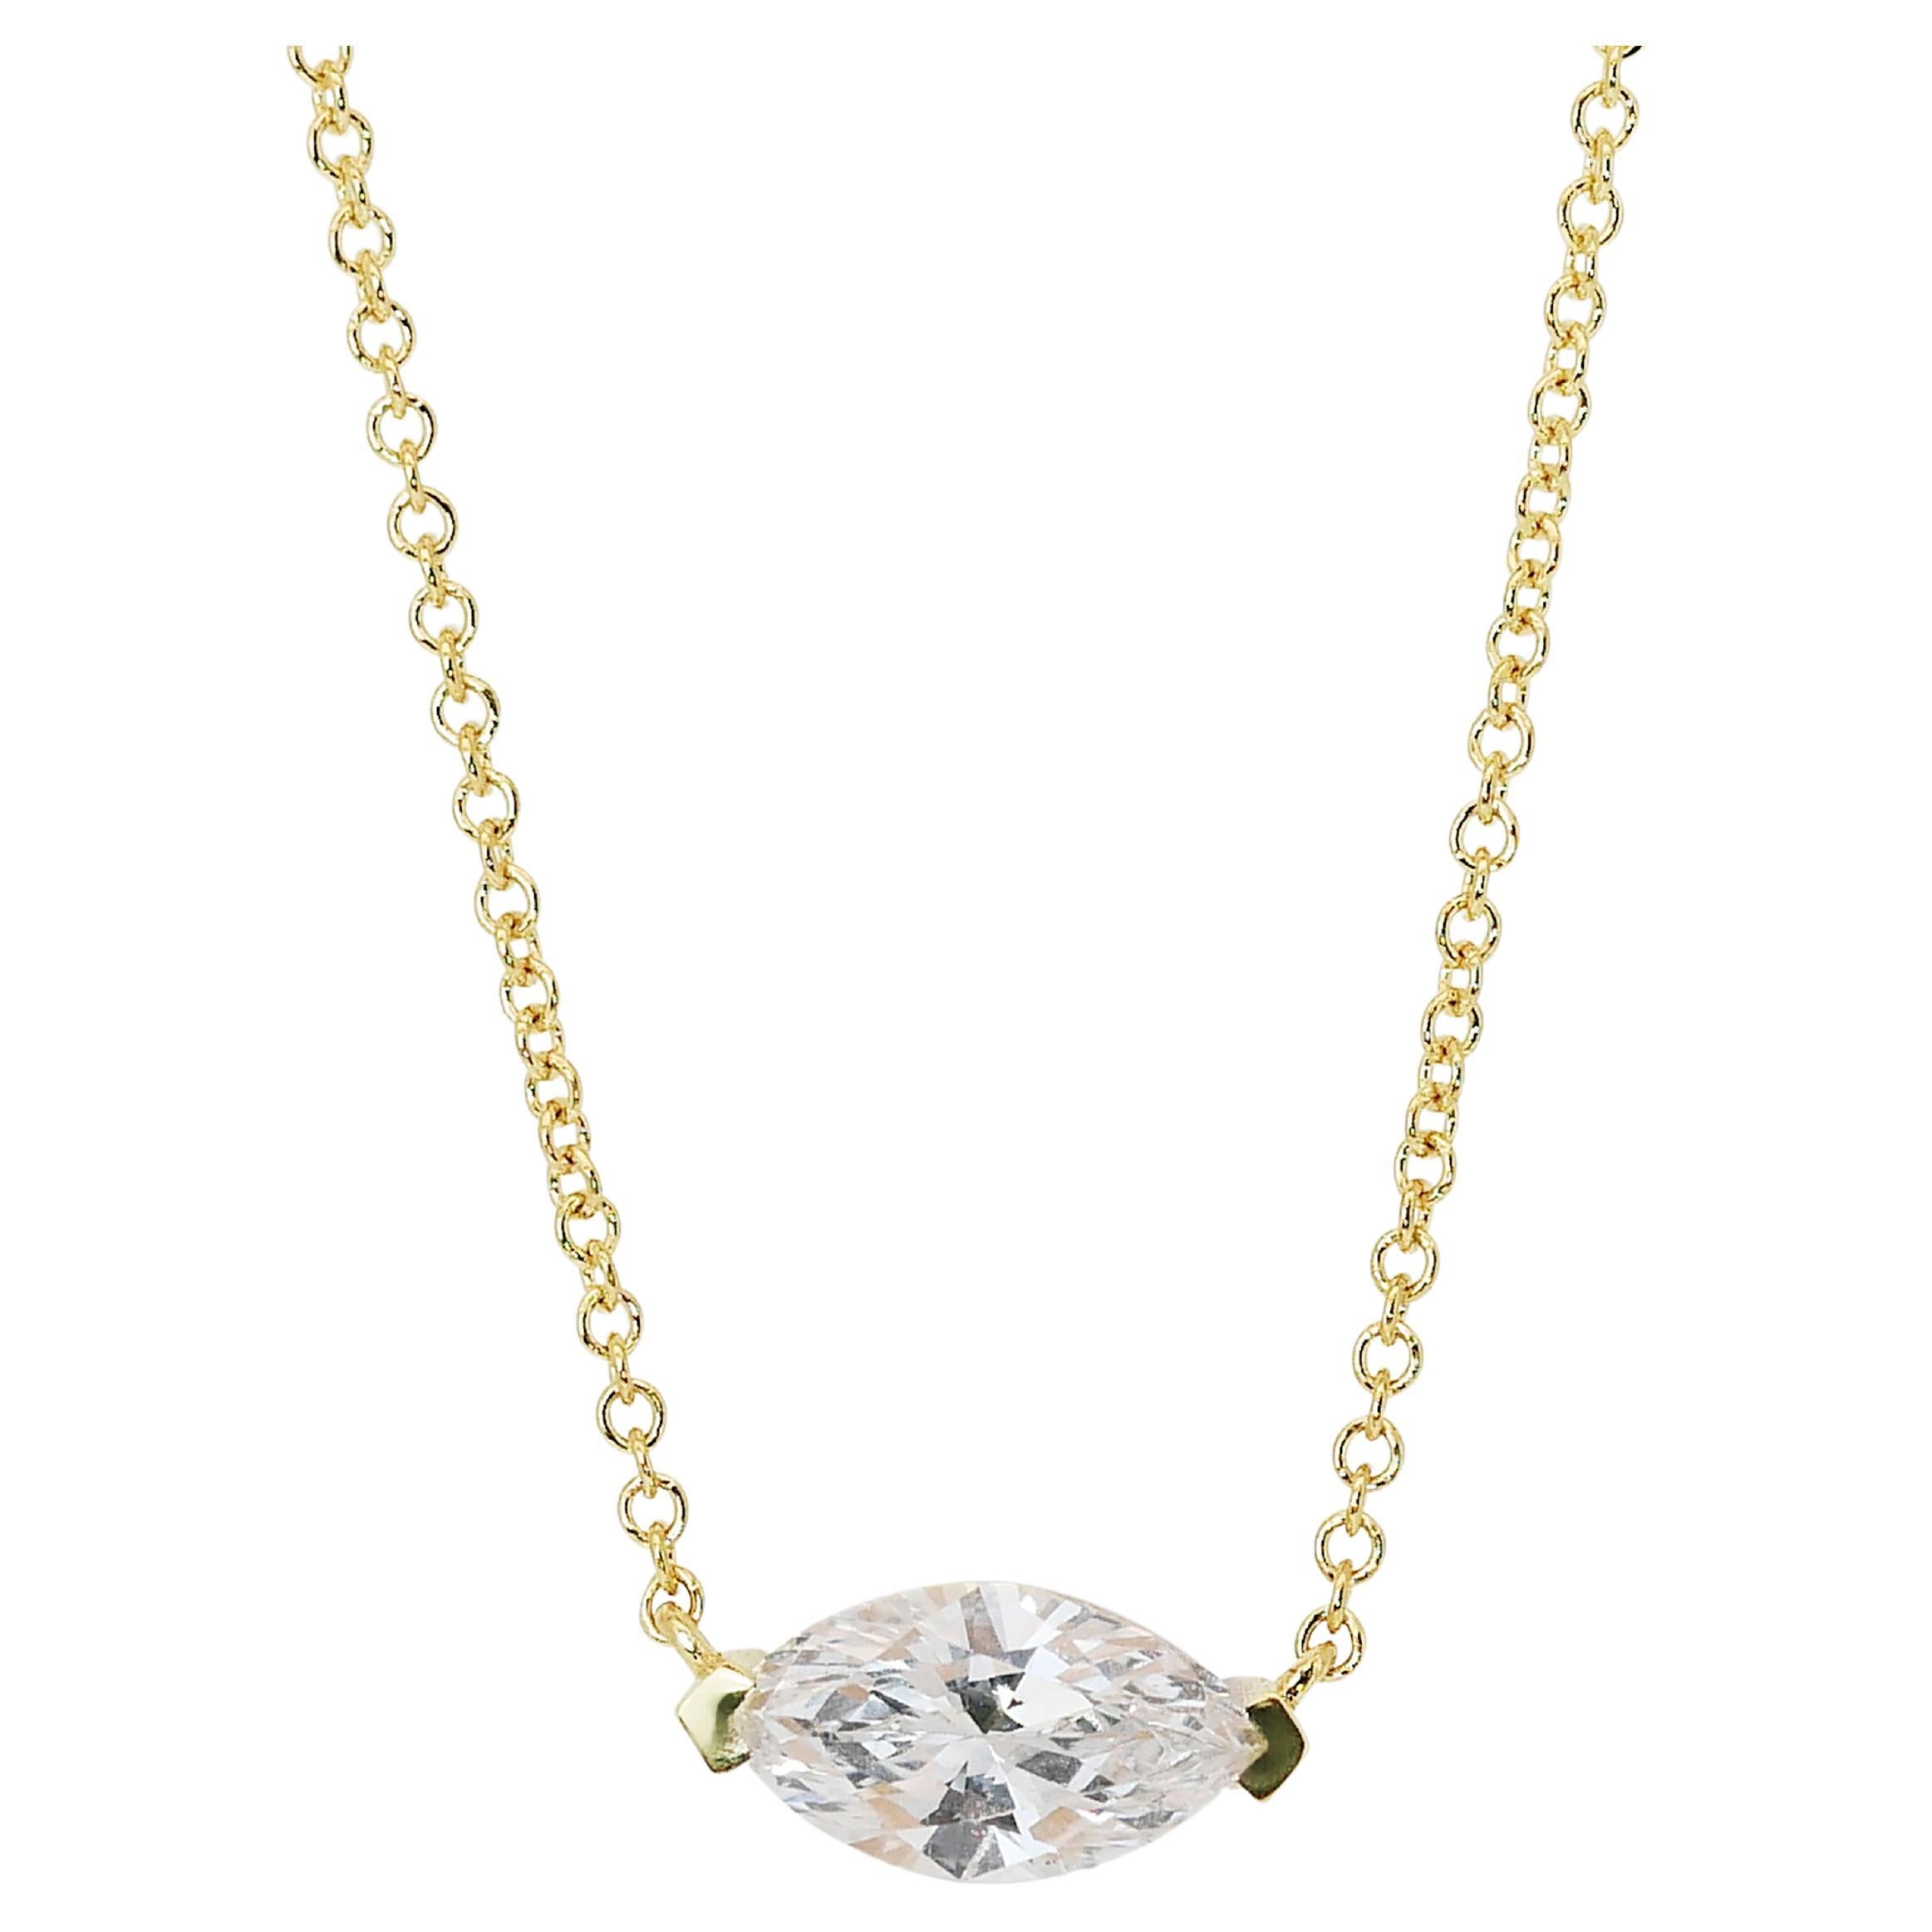 Elegant 1.01ct Diamond Solitaire Necklace in 18k Yellow Gold - GIA Certified For Sale